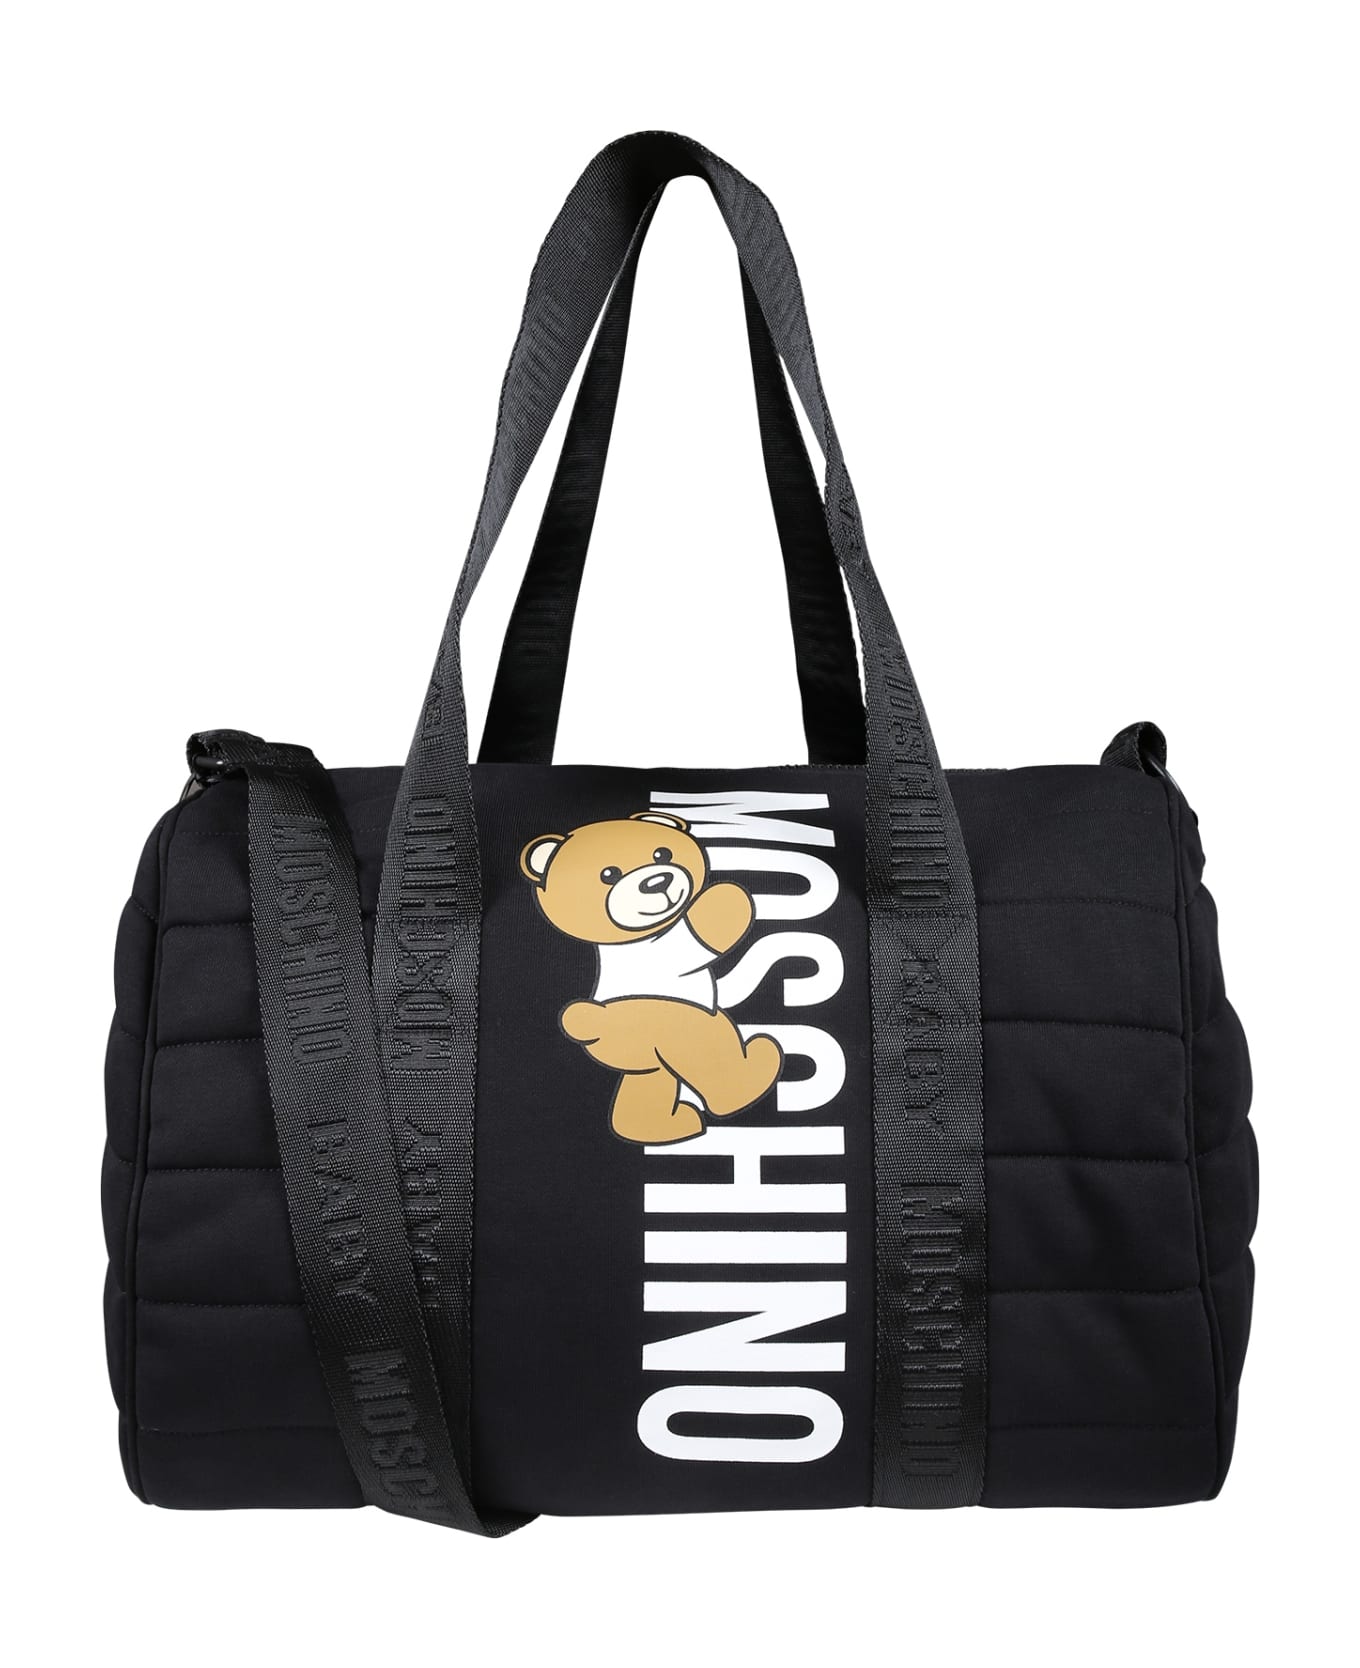 Moschino Black Changing Bag For Babykids With Teddy Bear And Logo - Black アクセサリー＆ギフト